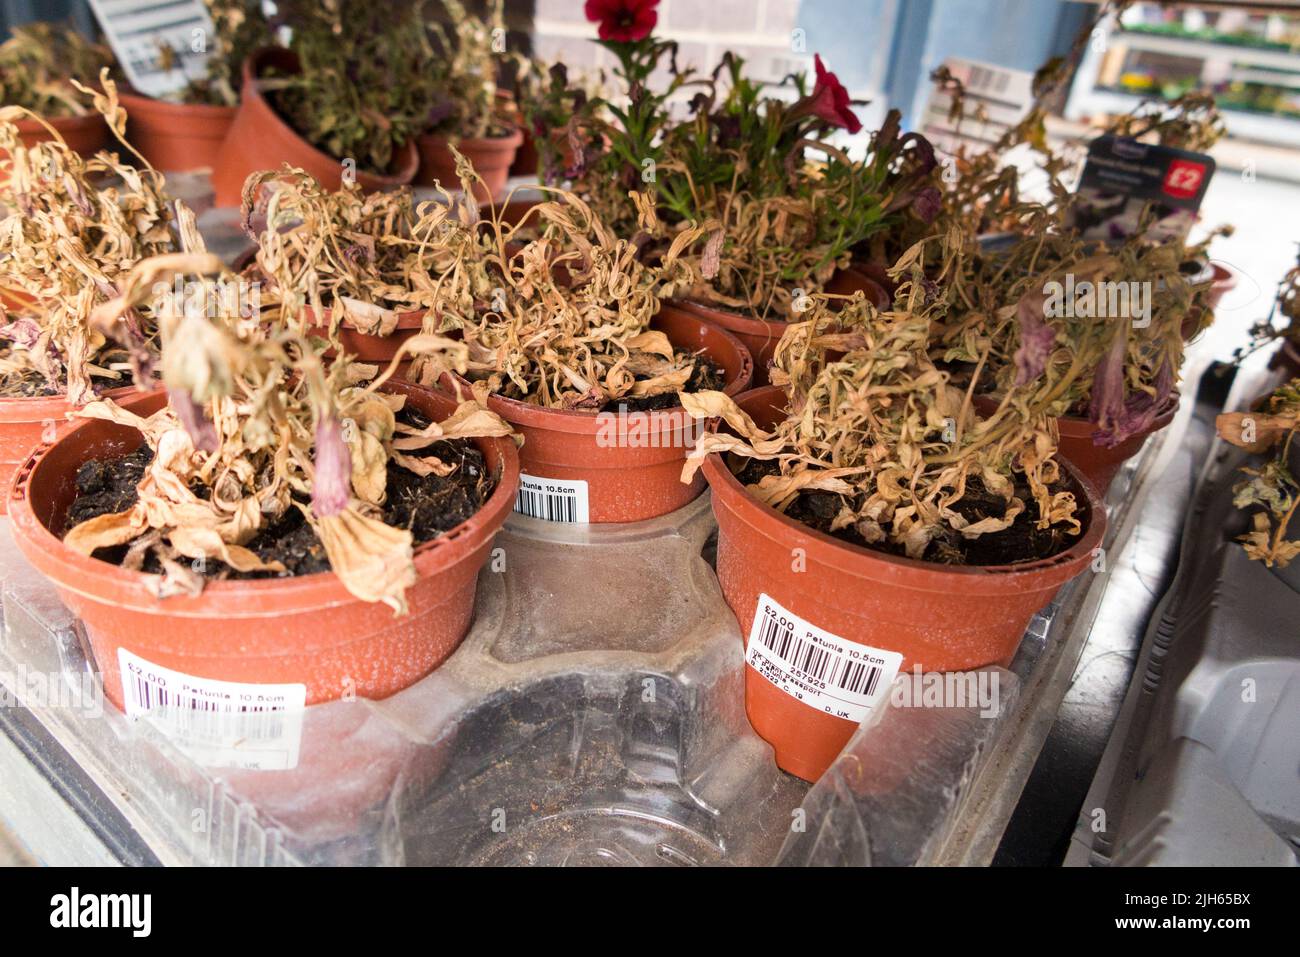 Flower / flowers / bedding plant for sale at Wickes DIY store supermarket. Wilted wilting plants are dying due to lack of care / watering / shortage of water. UK. (131) Stock Photo